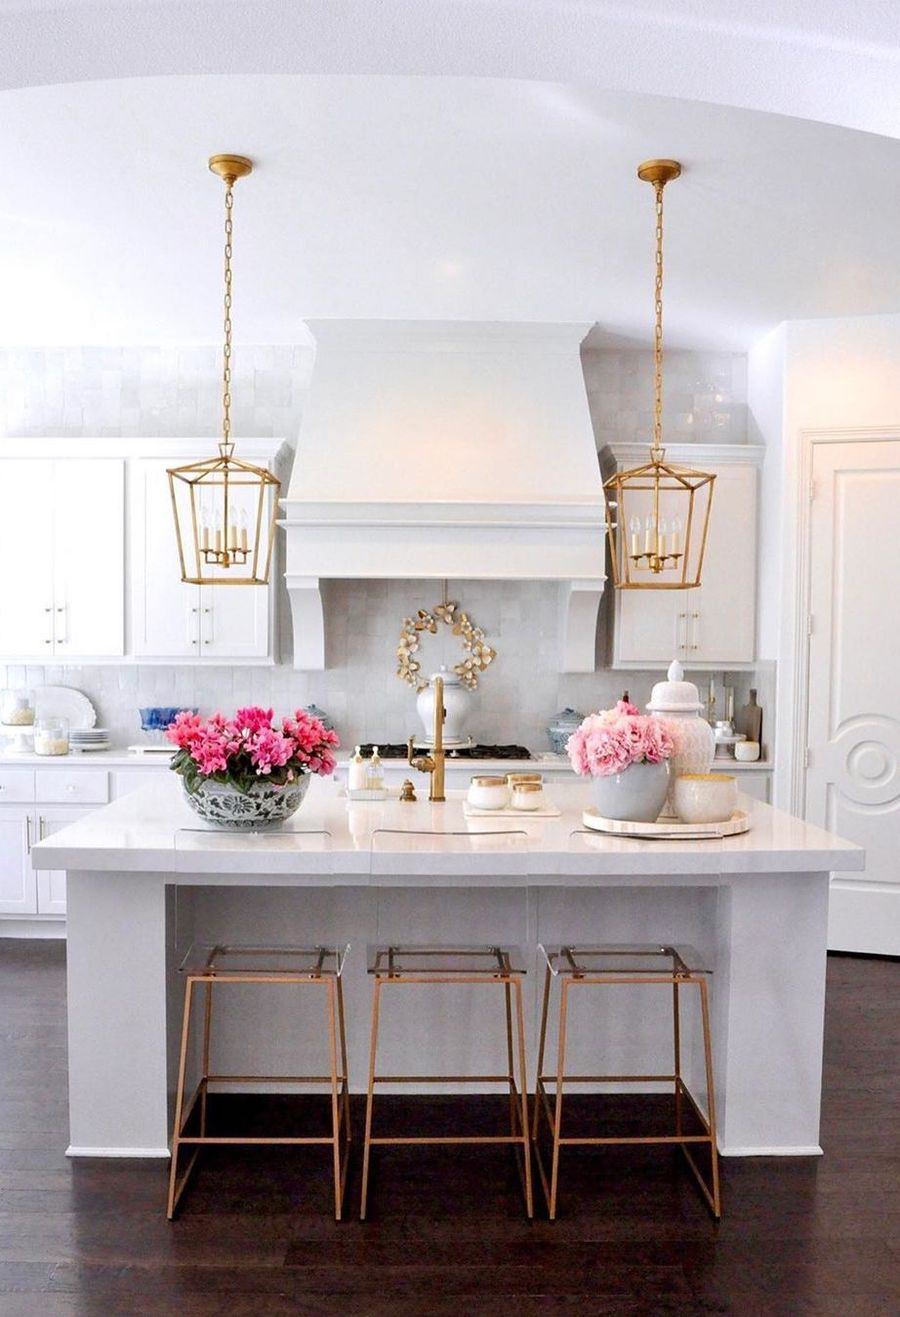 Acrylic Counter Chairs in Glam Kitchen via @decorgold